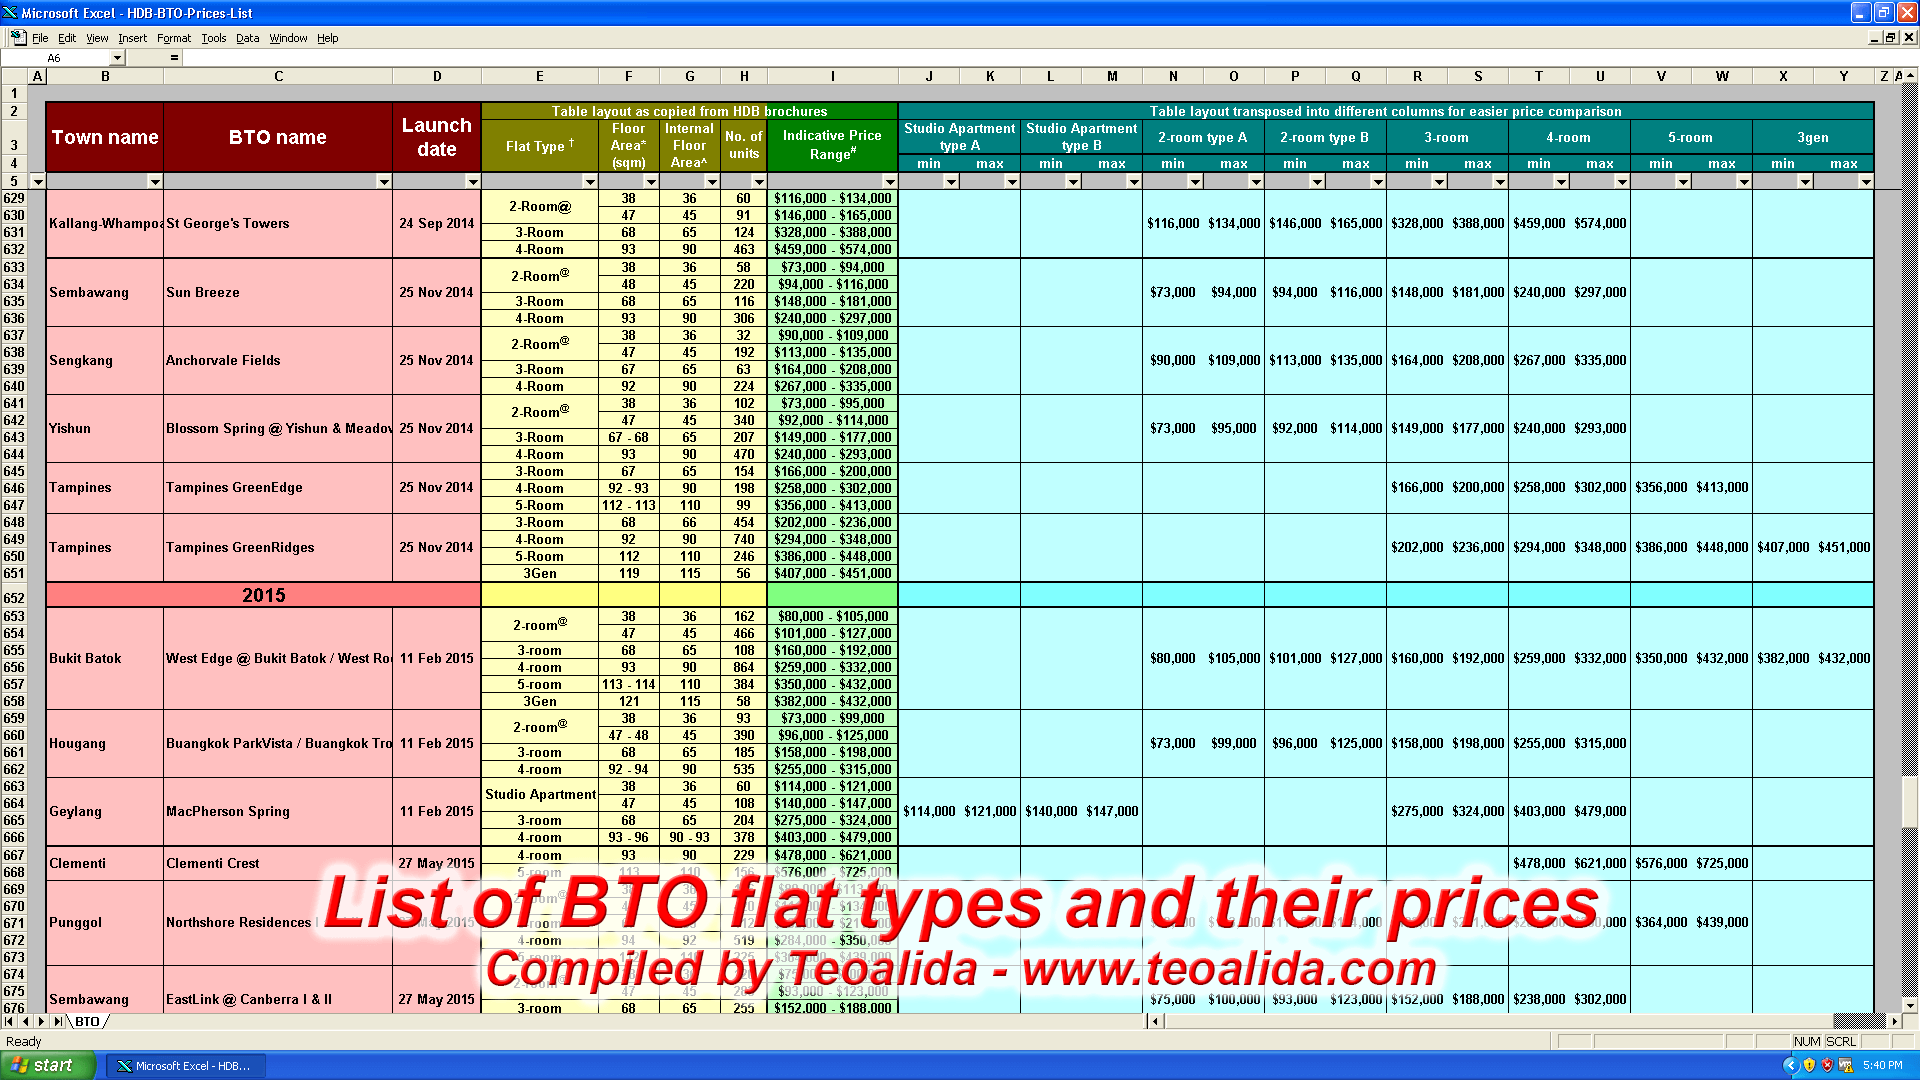 List of BTO flat types and their prices